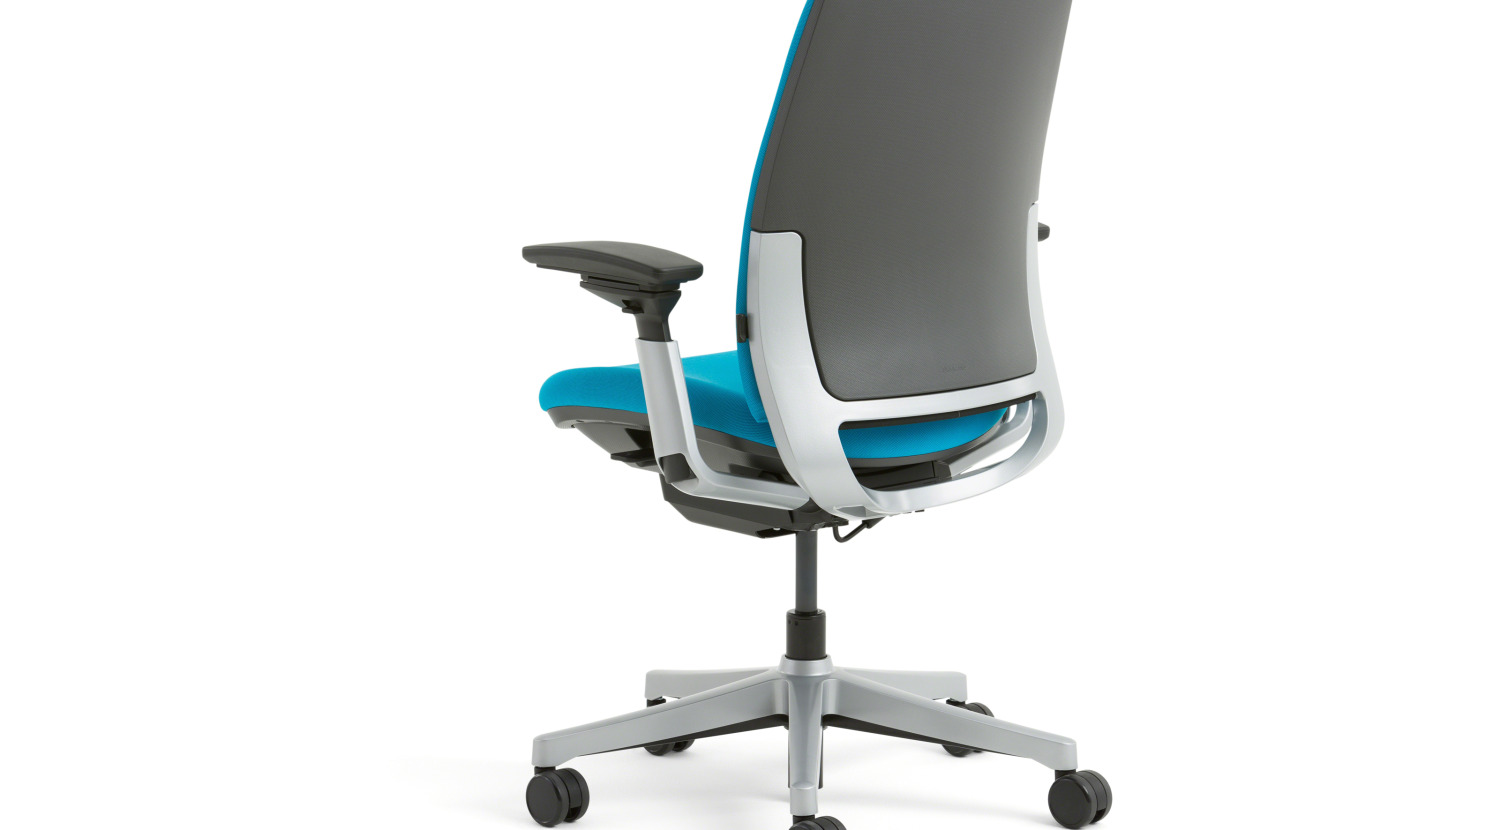 Buying an Office Chair? Check Out These Simple Guidelines.